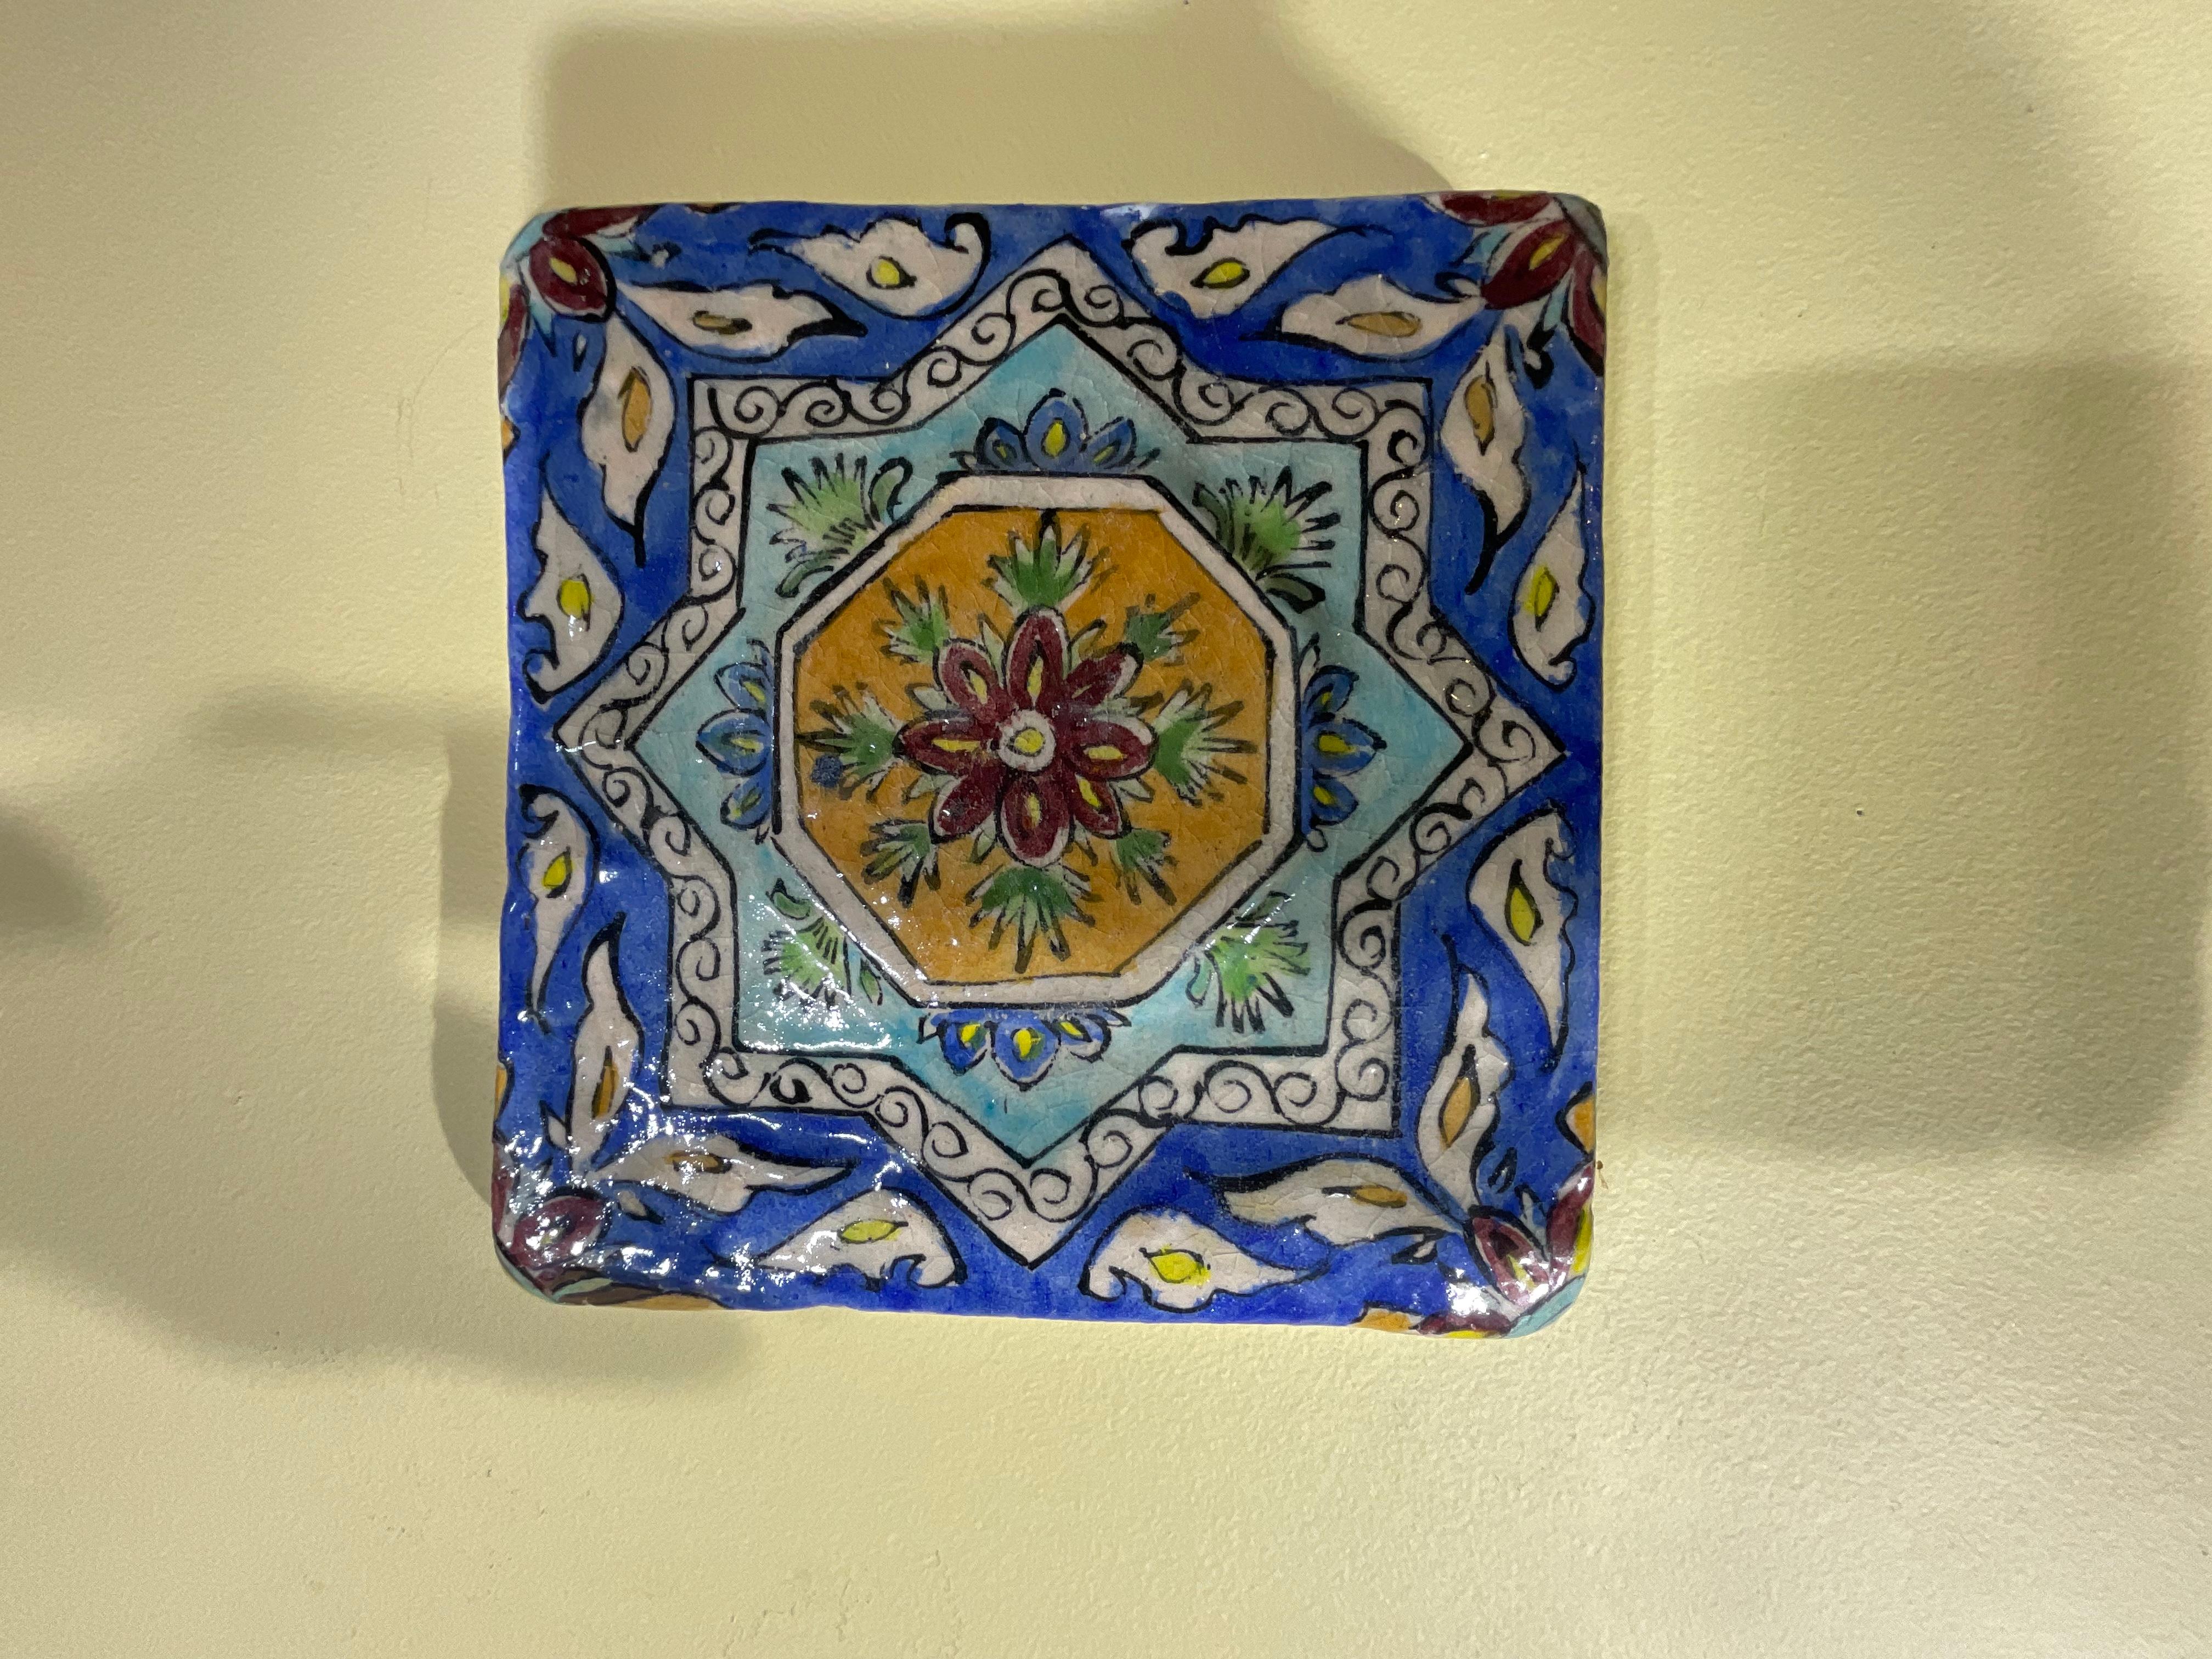 hanging decorative tiles on wall